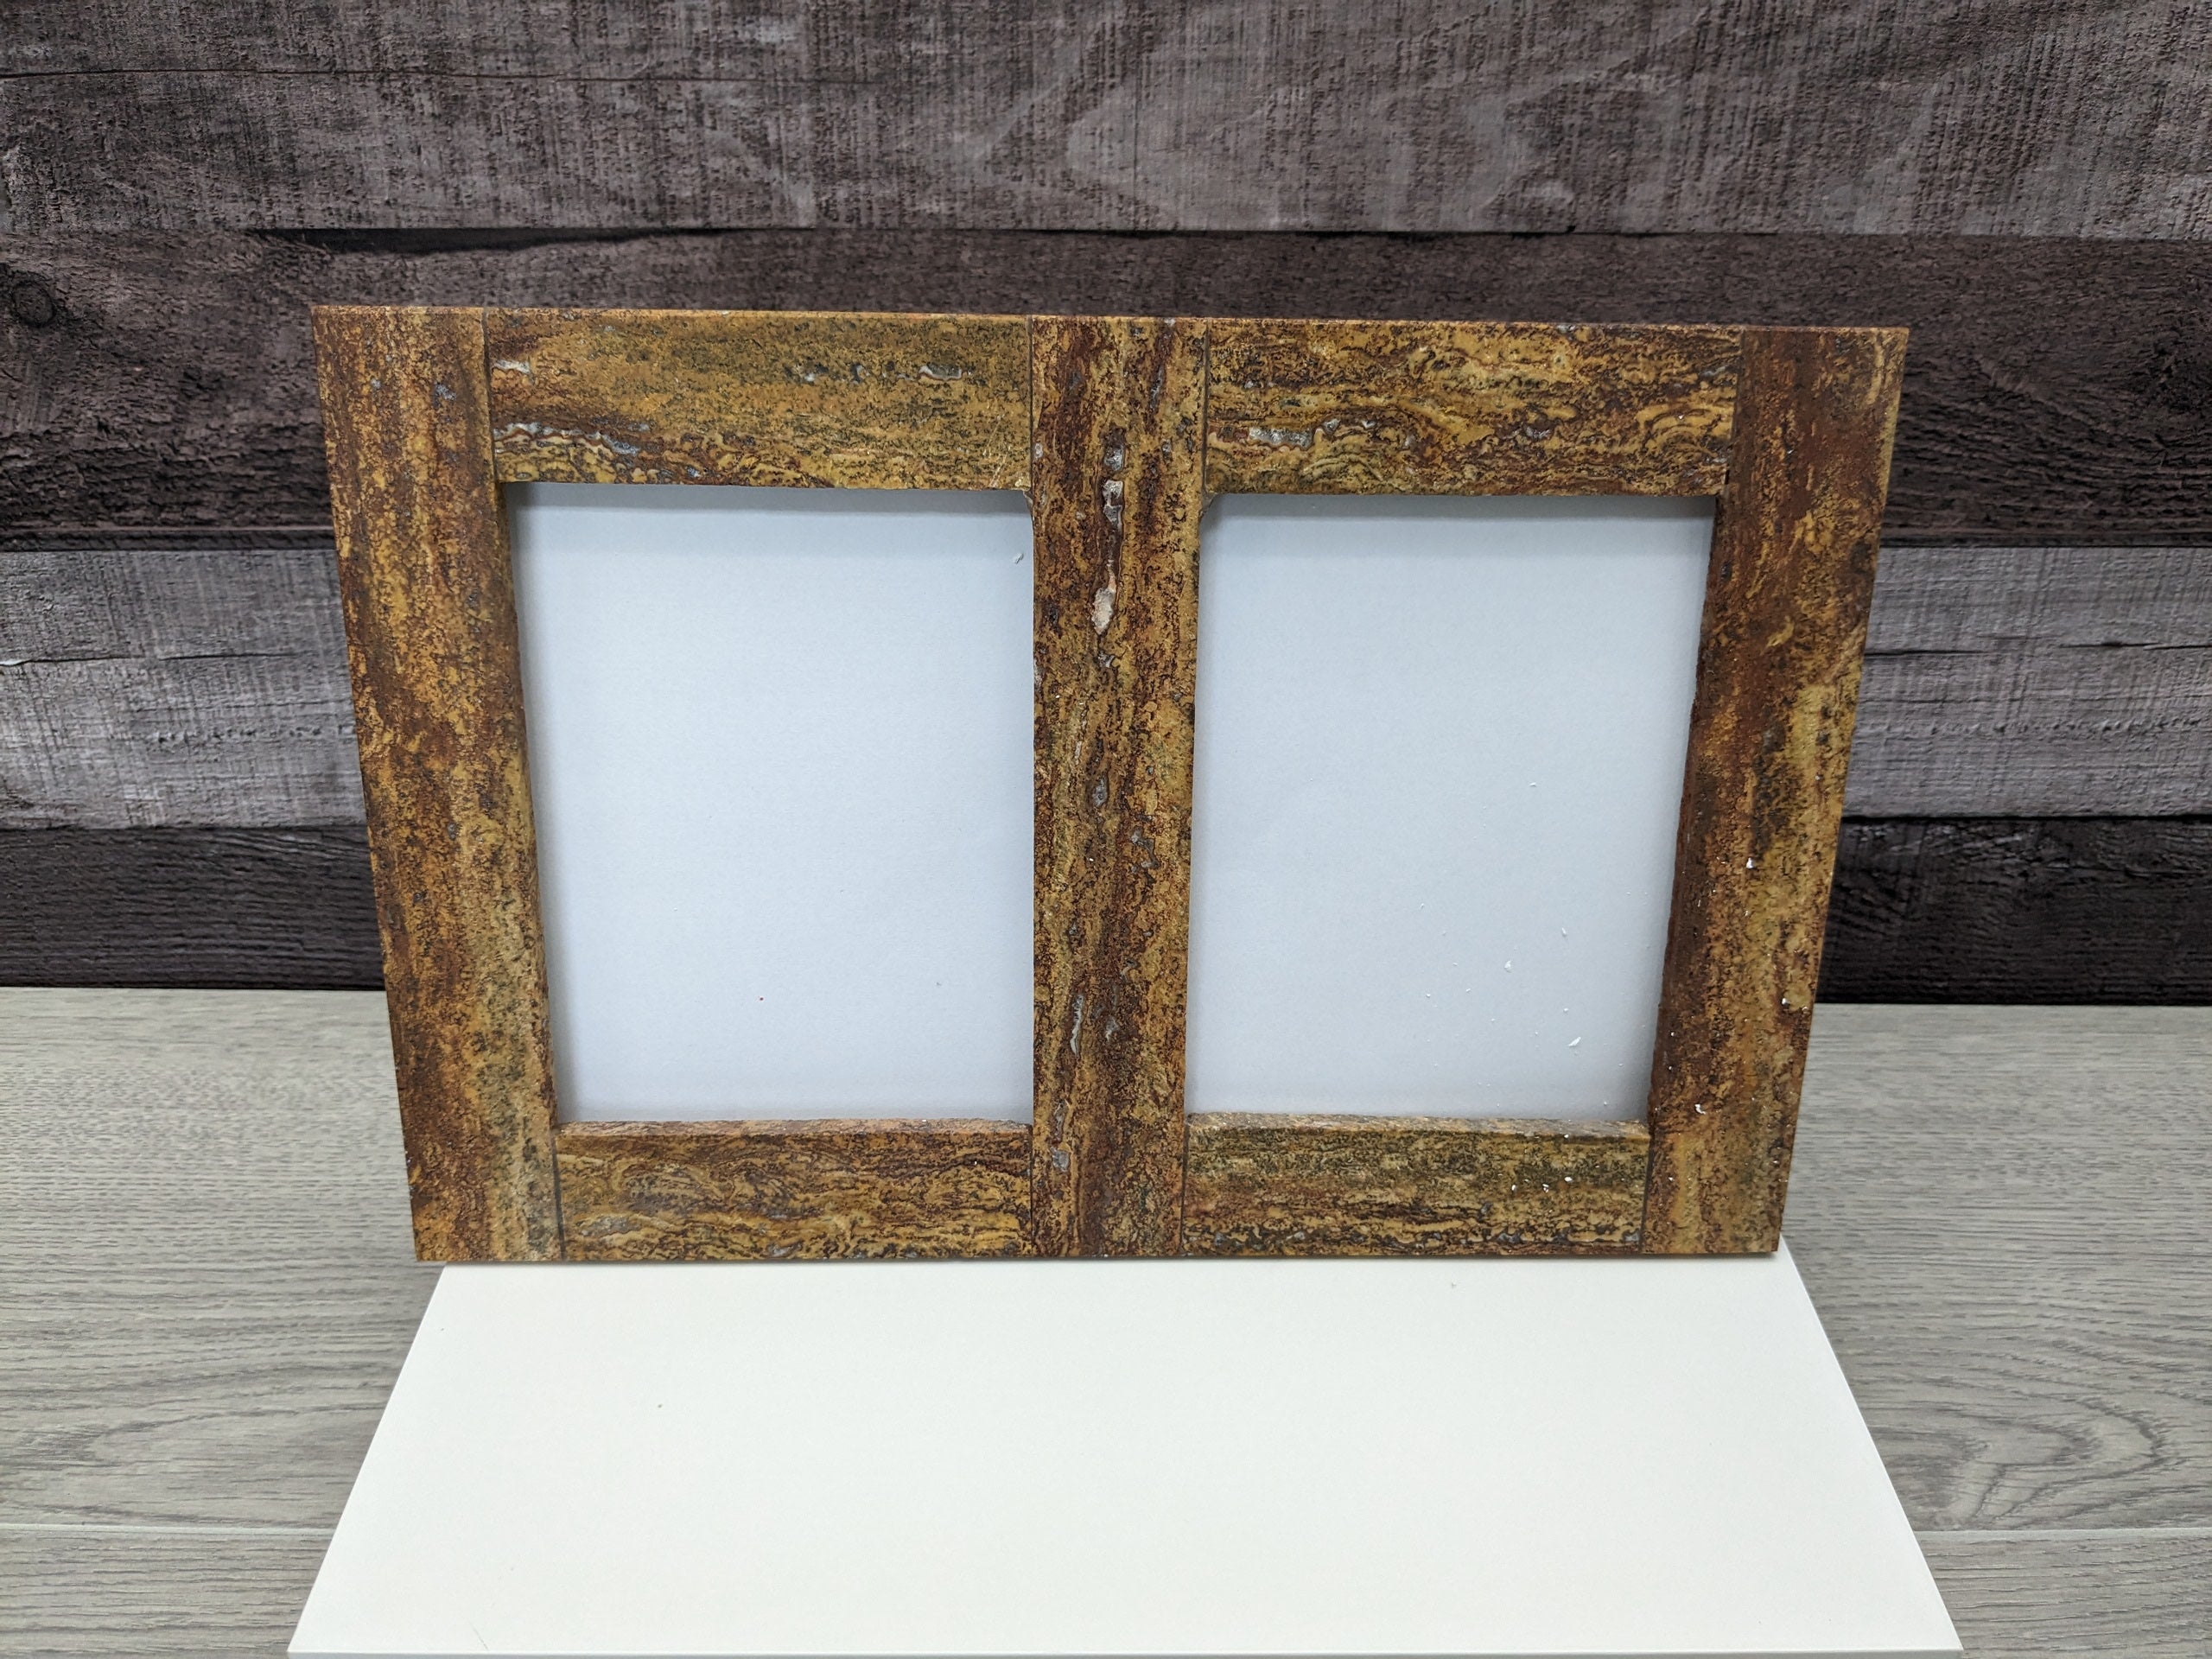 Brown Travertine Stone Double Frame. Handmade in Mexico. We package and ship from the USA. Buy now at www.felipeandgrace.com. 